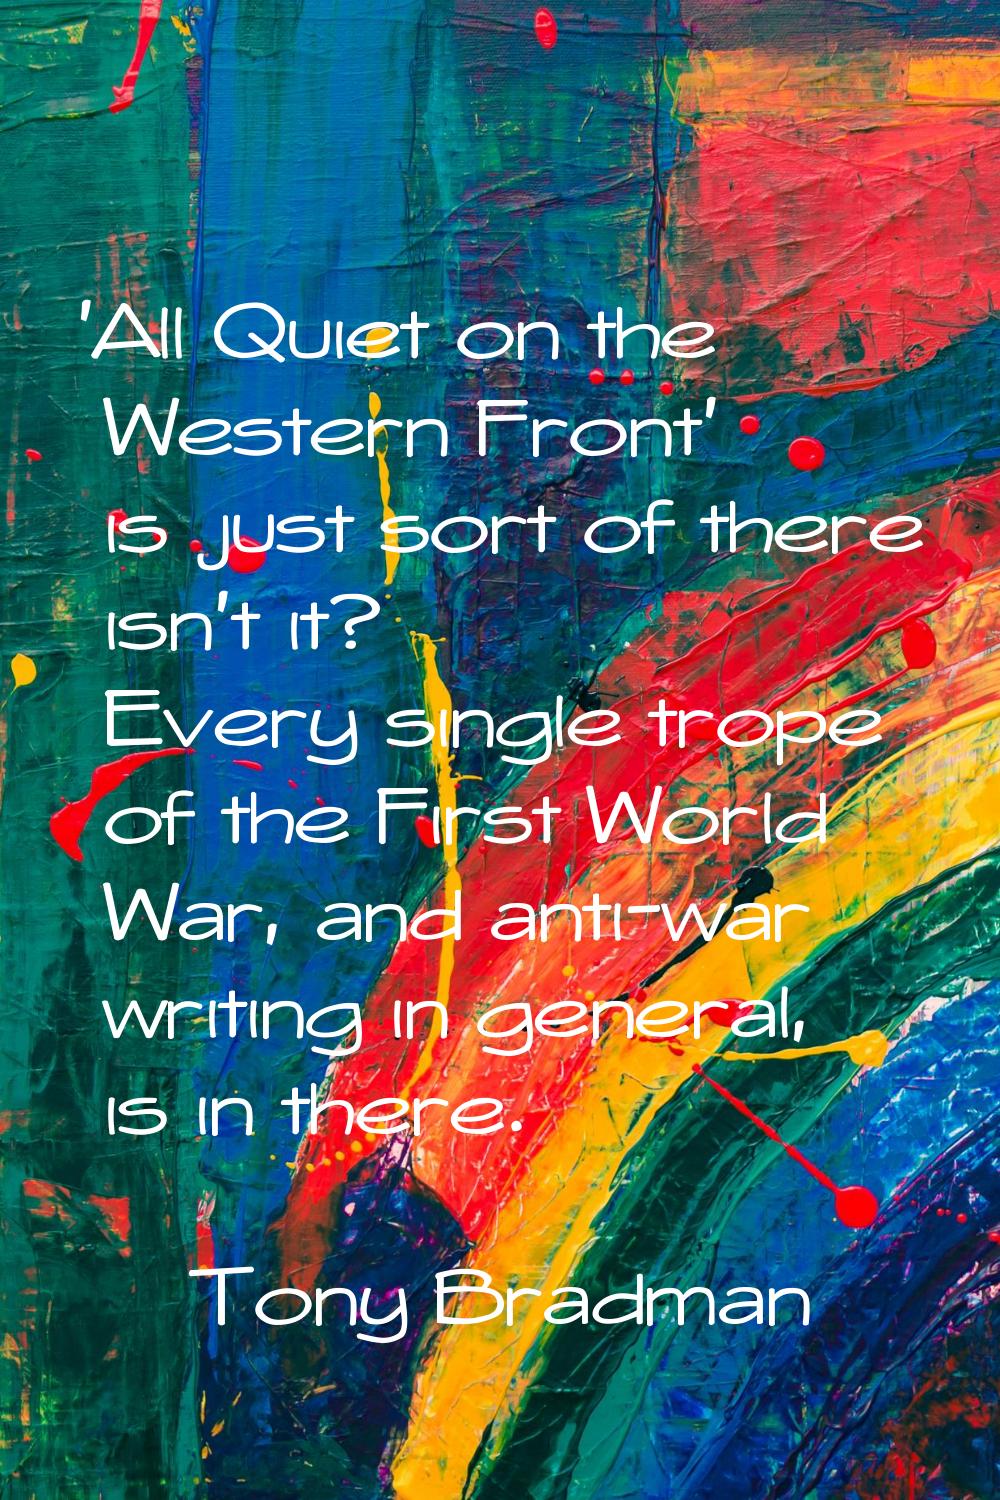 'All Quiet on the Western Front' is just sort of there isn't it? Every single trope of the First Wo